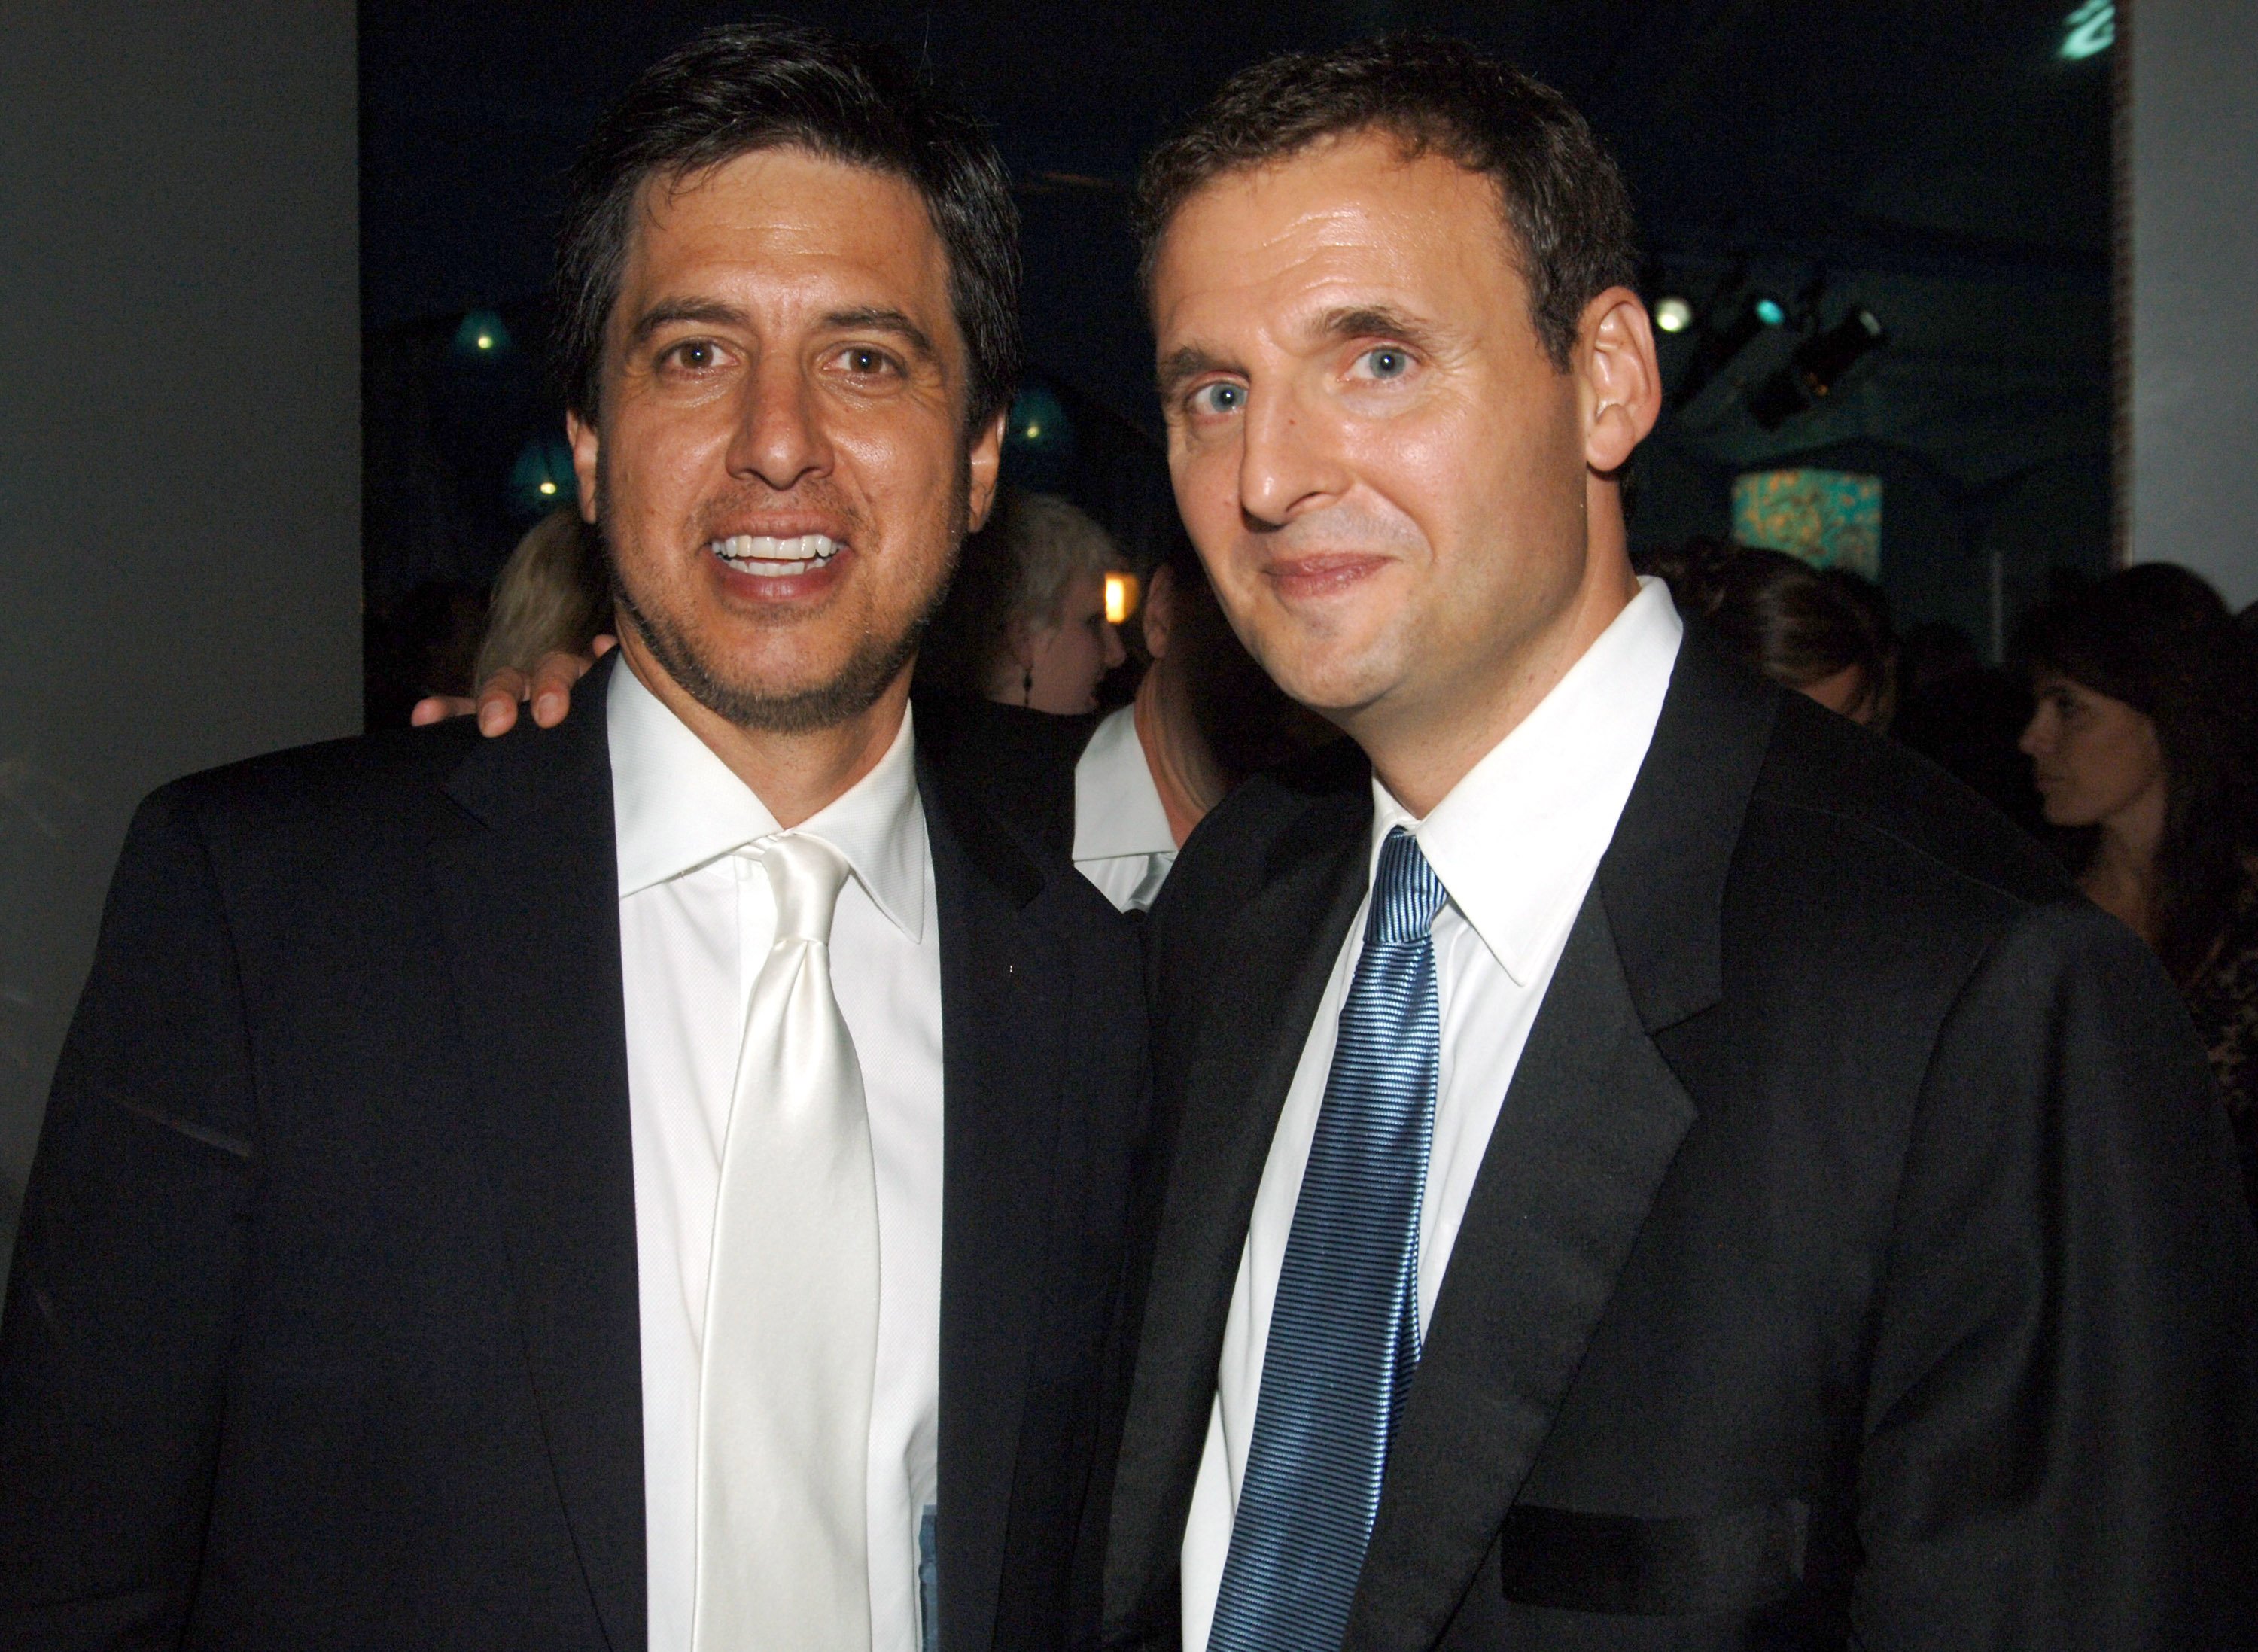 Ray Romano, left, and 'Everybody Loves Raymond' creator Phil Rosenthal, host of Netflix's 'Somebody Feed Phil'